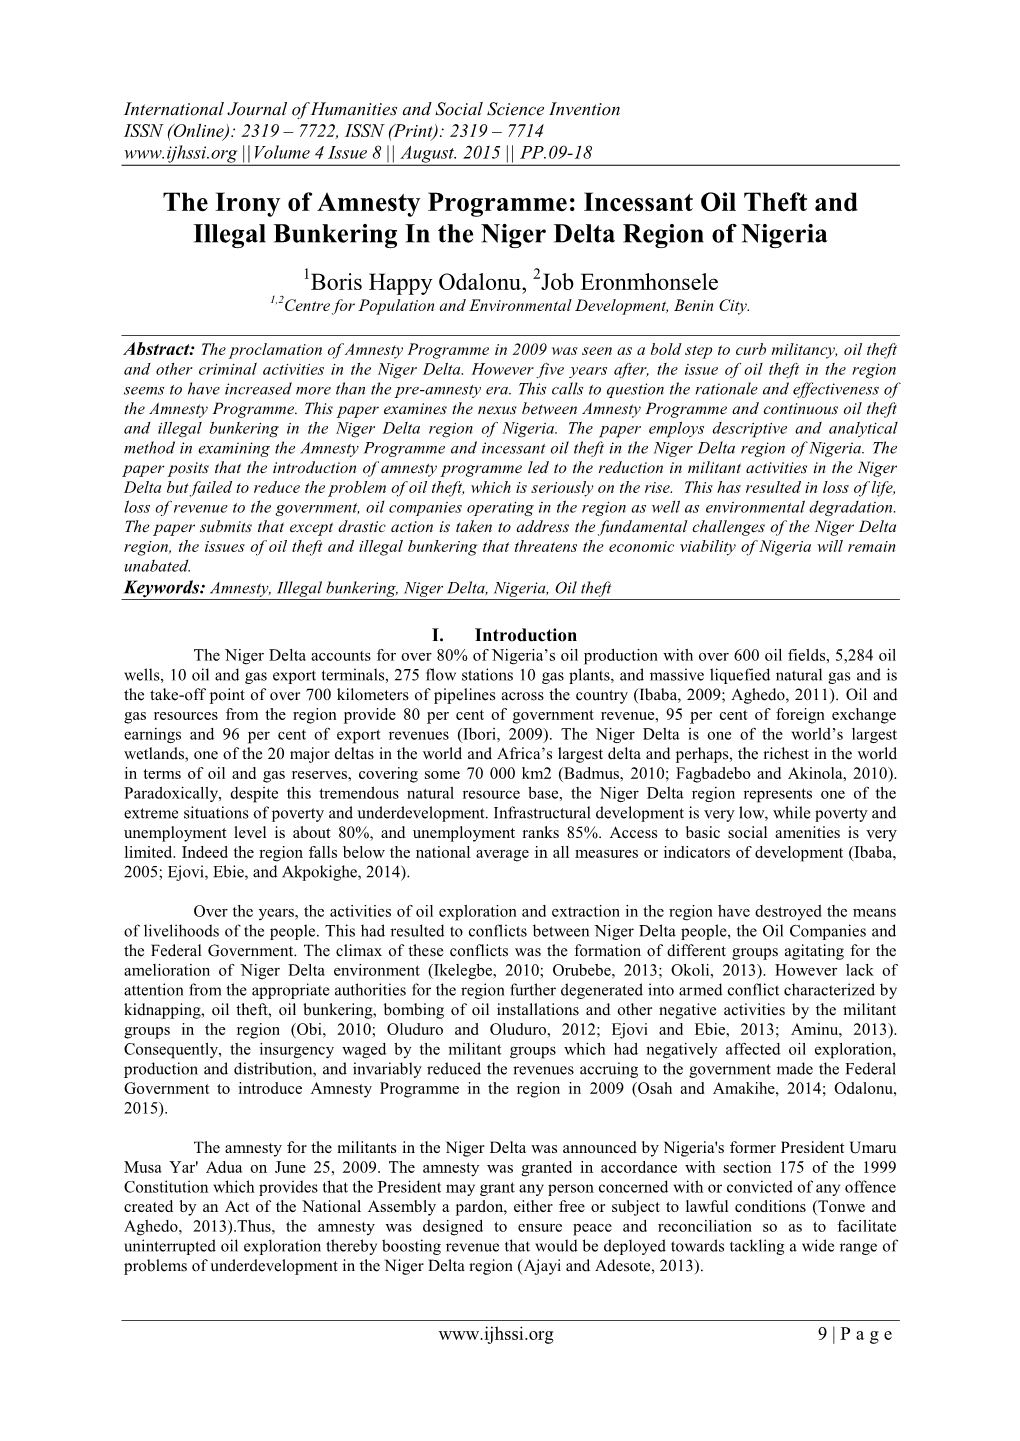 Incessant Oil Theft and Illegal Bunkering in the Niger Delta Region of Nigeria